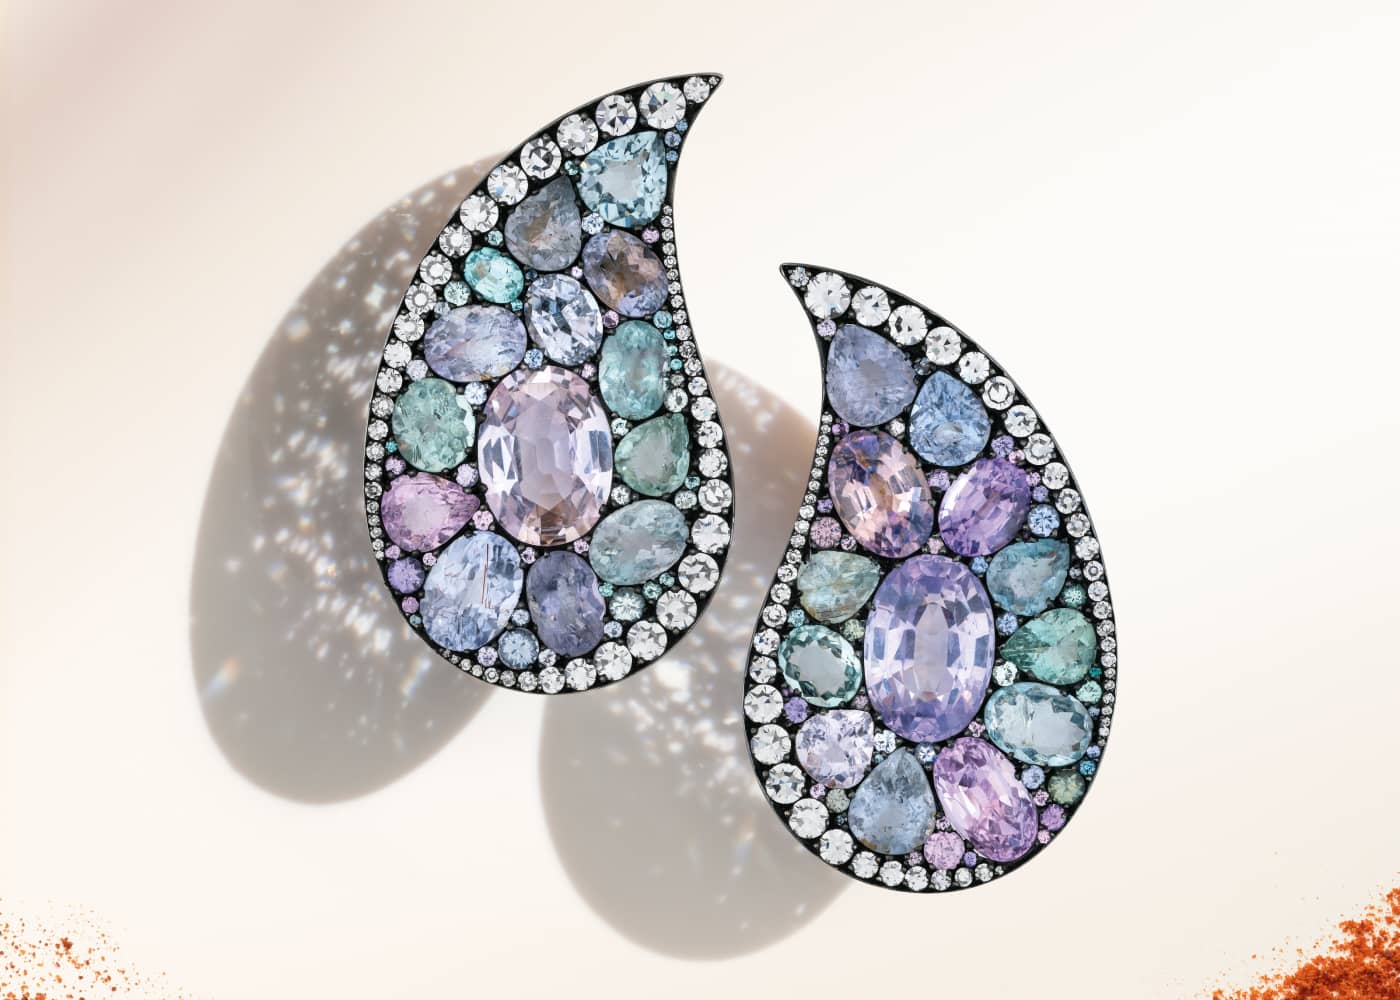 JAR coloured sapphire and diamond ‘paisley’ earrings in blackened silver and 18k yellow gold, due to be sold at the Christie’s Magnificent Jewels auction on 17 May 2023